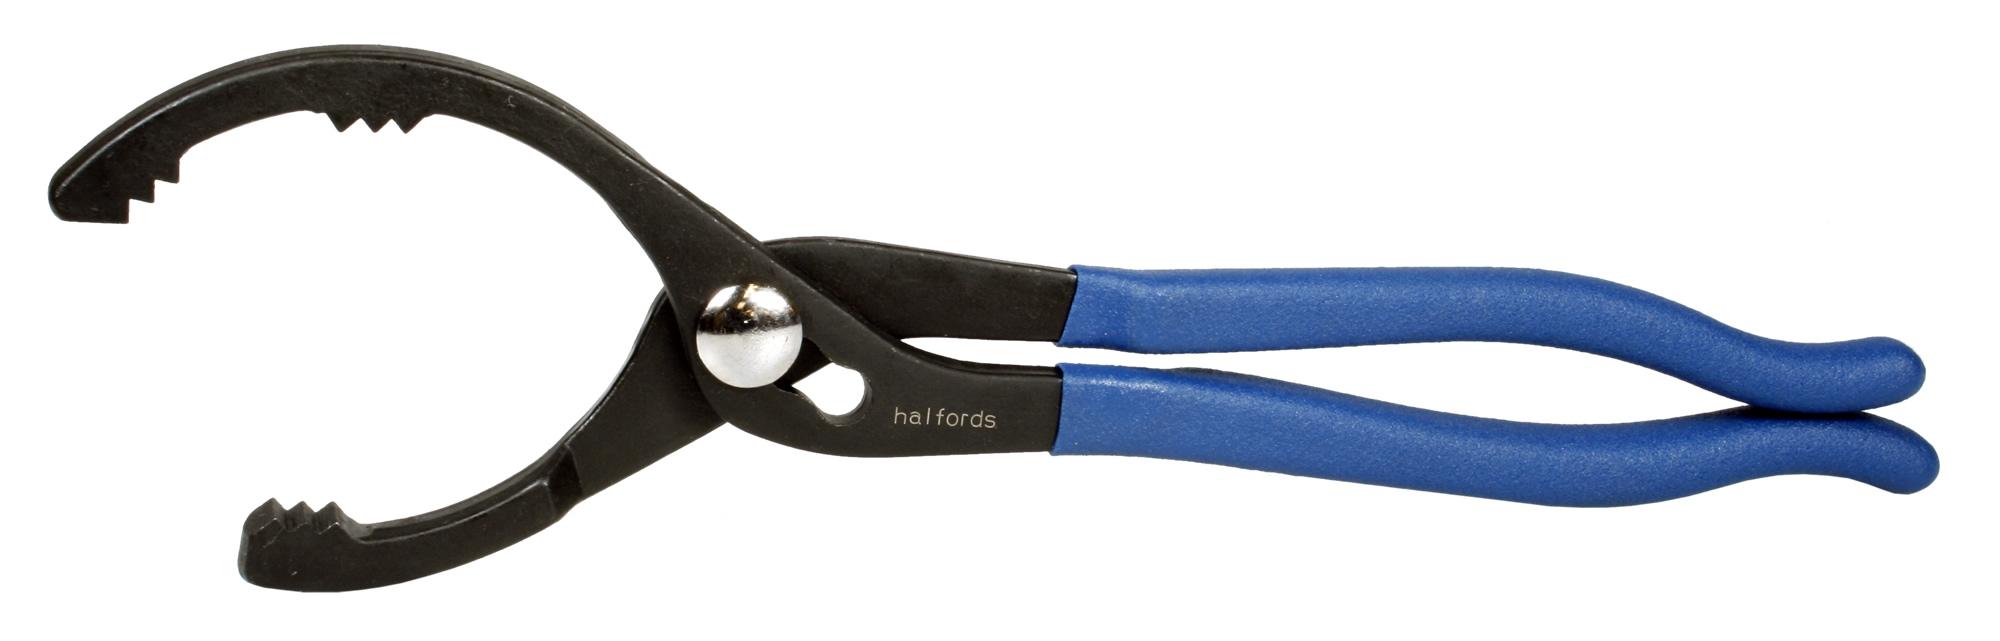 Halfords Oil Filter Pliers 300Mm (12 Inch)